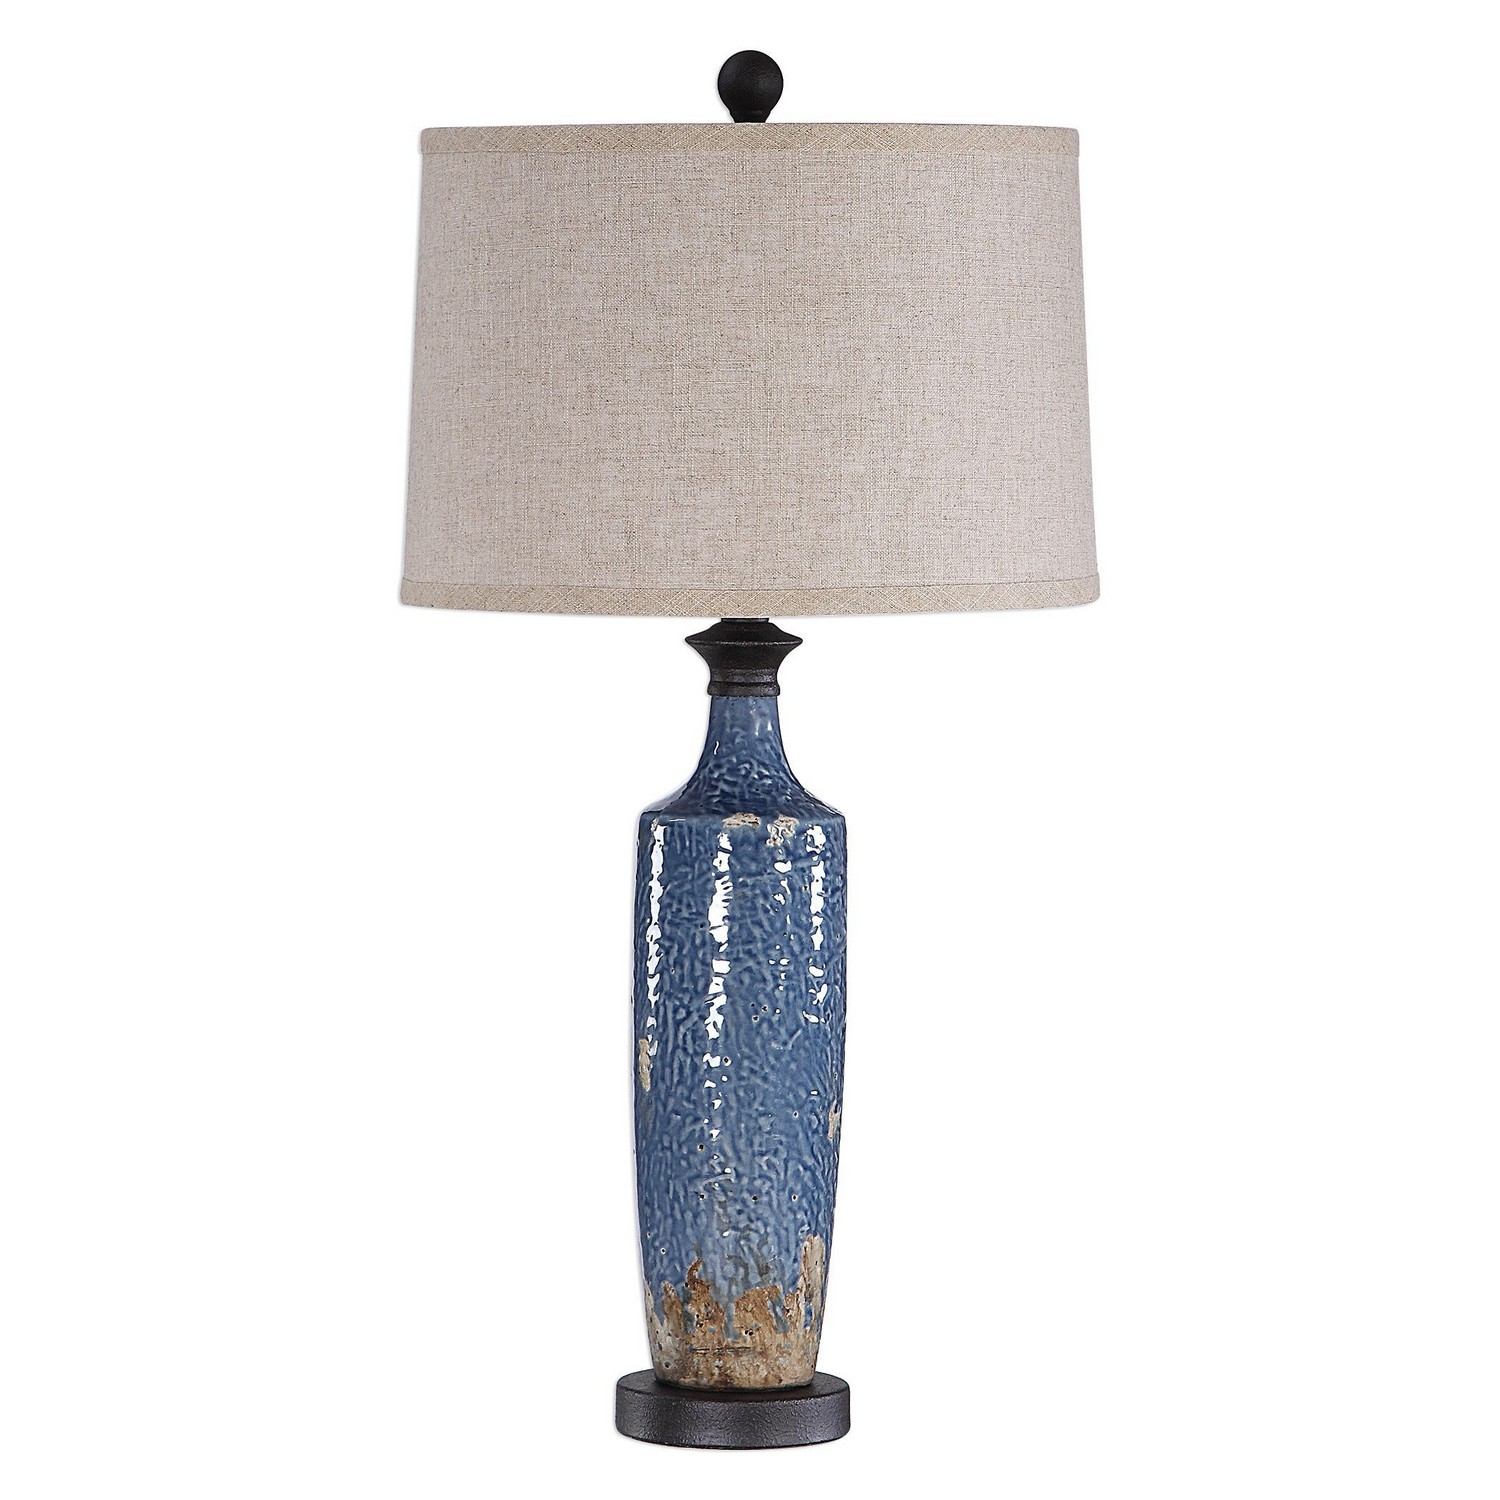 Uttermost W26026-1 Table Lamp - Blue